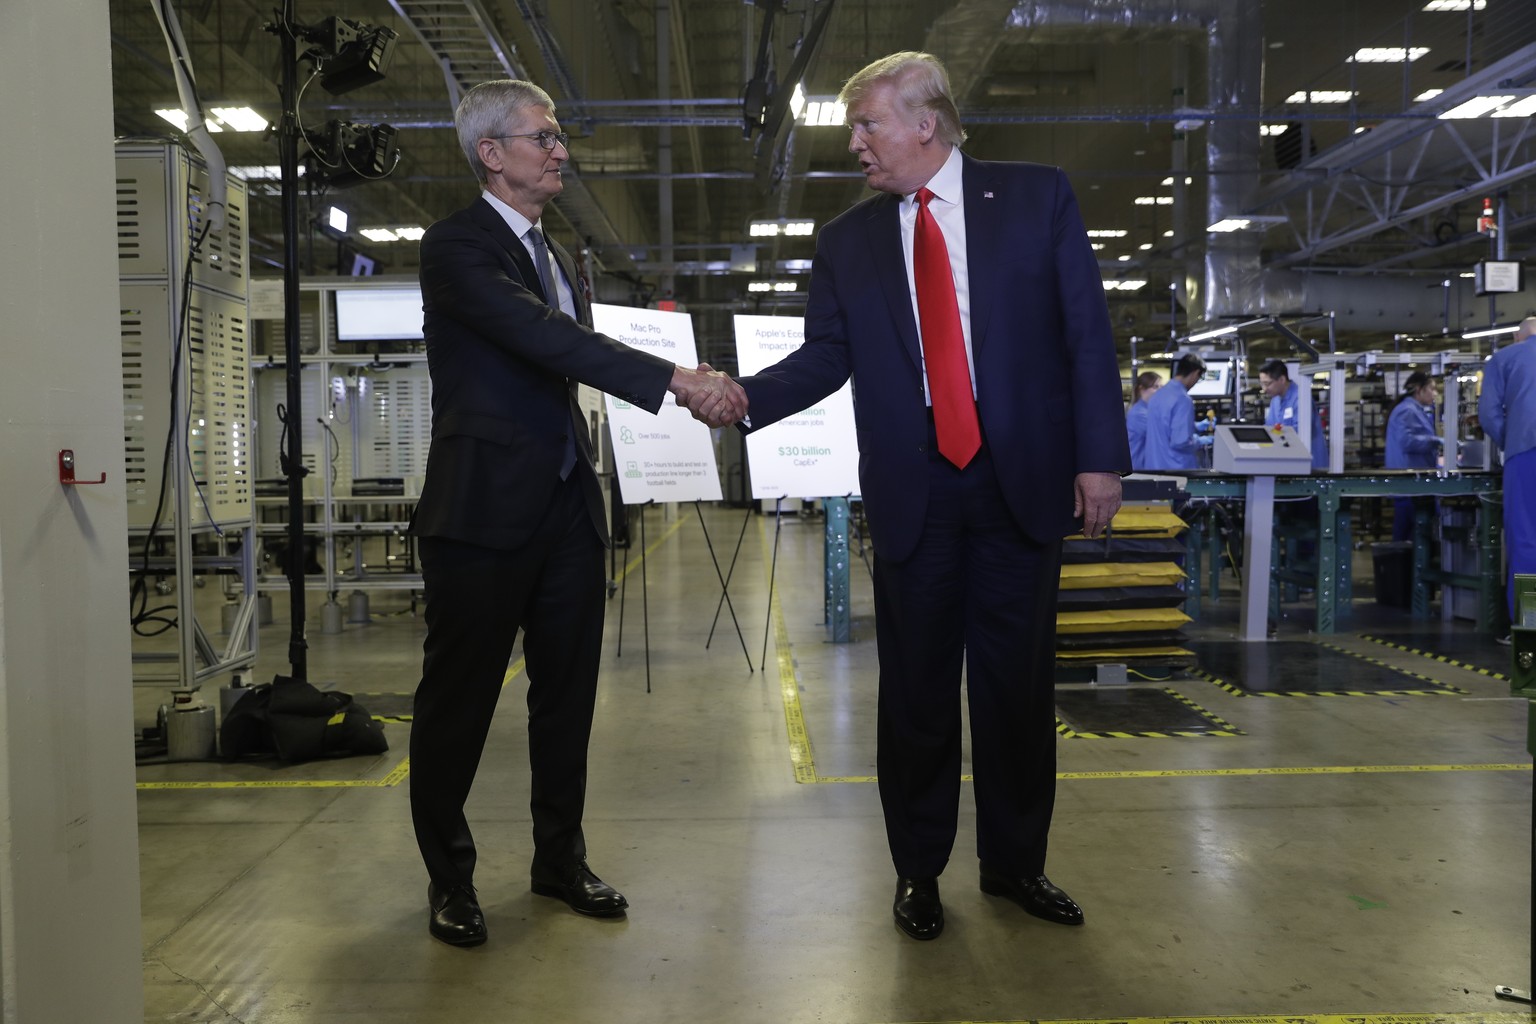 Apple CEO Tim Cook and President Donald Trump shake hands during a tour of an Apple manufacturing plant, Wednesday, Nov. 20, 2019, in Austin. (AP Photo/ Evan Vucci)
Donald Trump